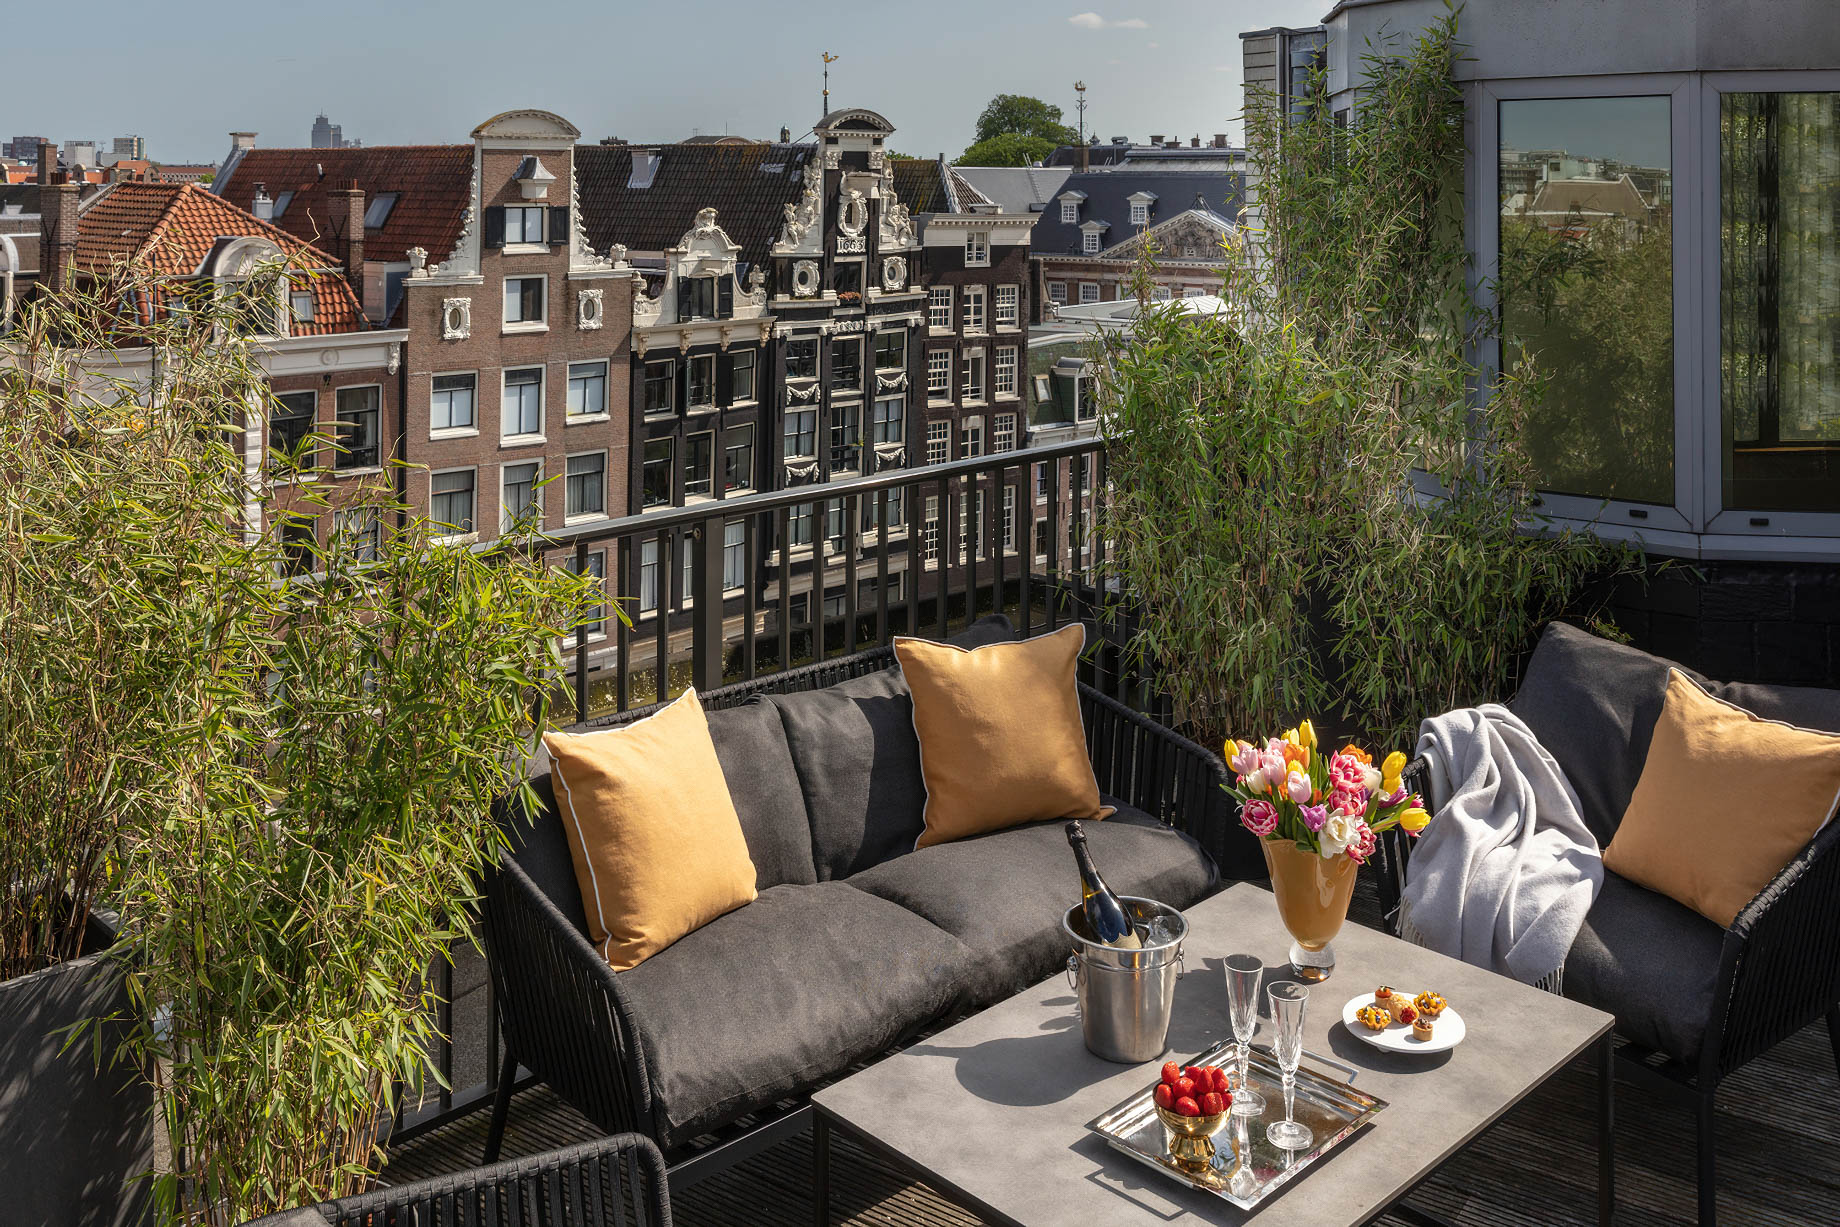 Anantara Grand Hotel Krasnapolsky Amsterdam – Netherlands – Presidential Suite with Rooftop Terrace